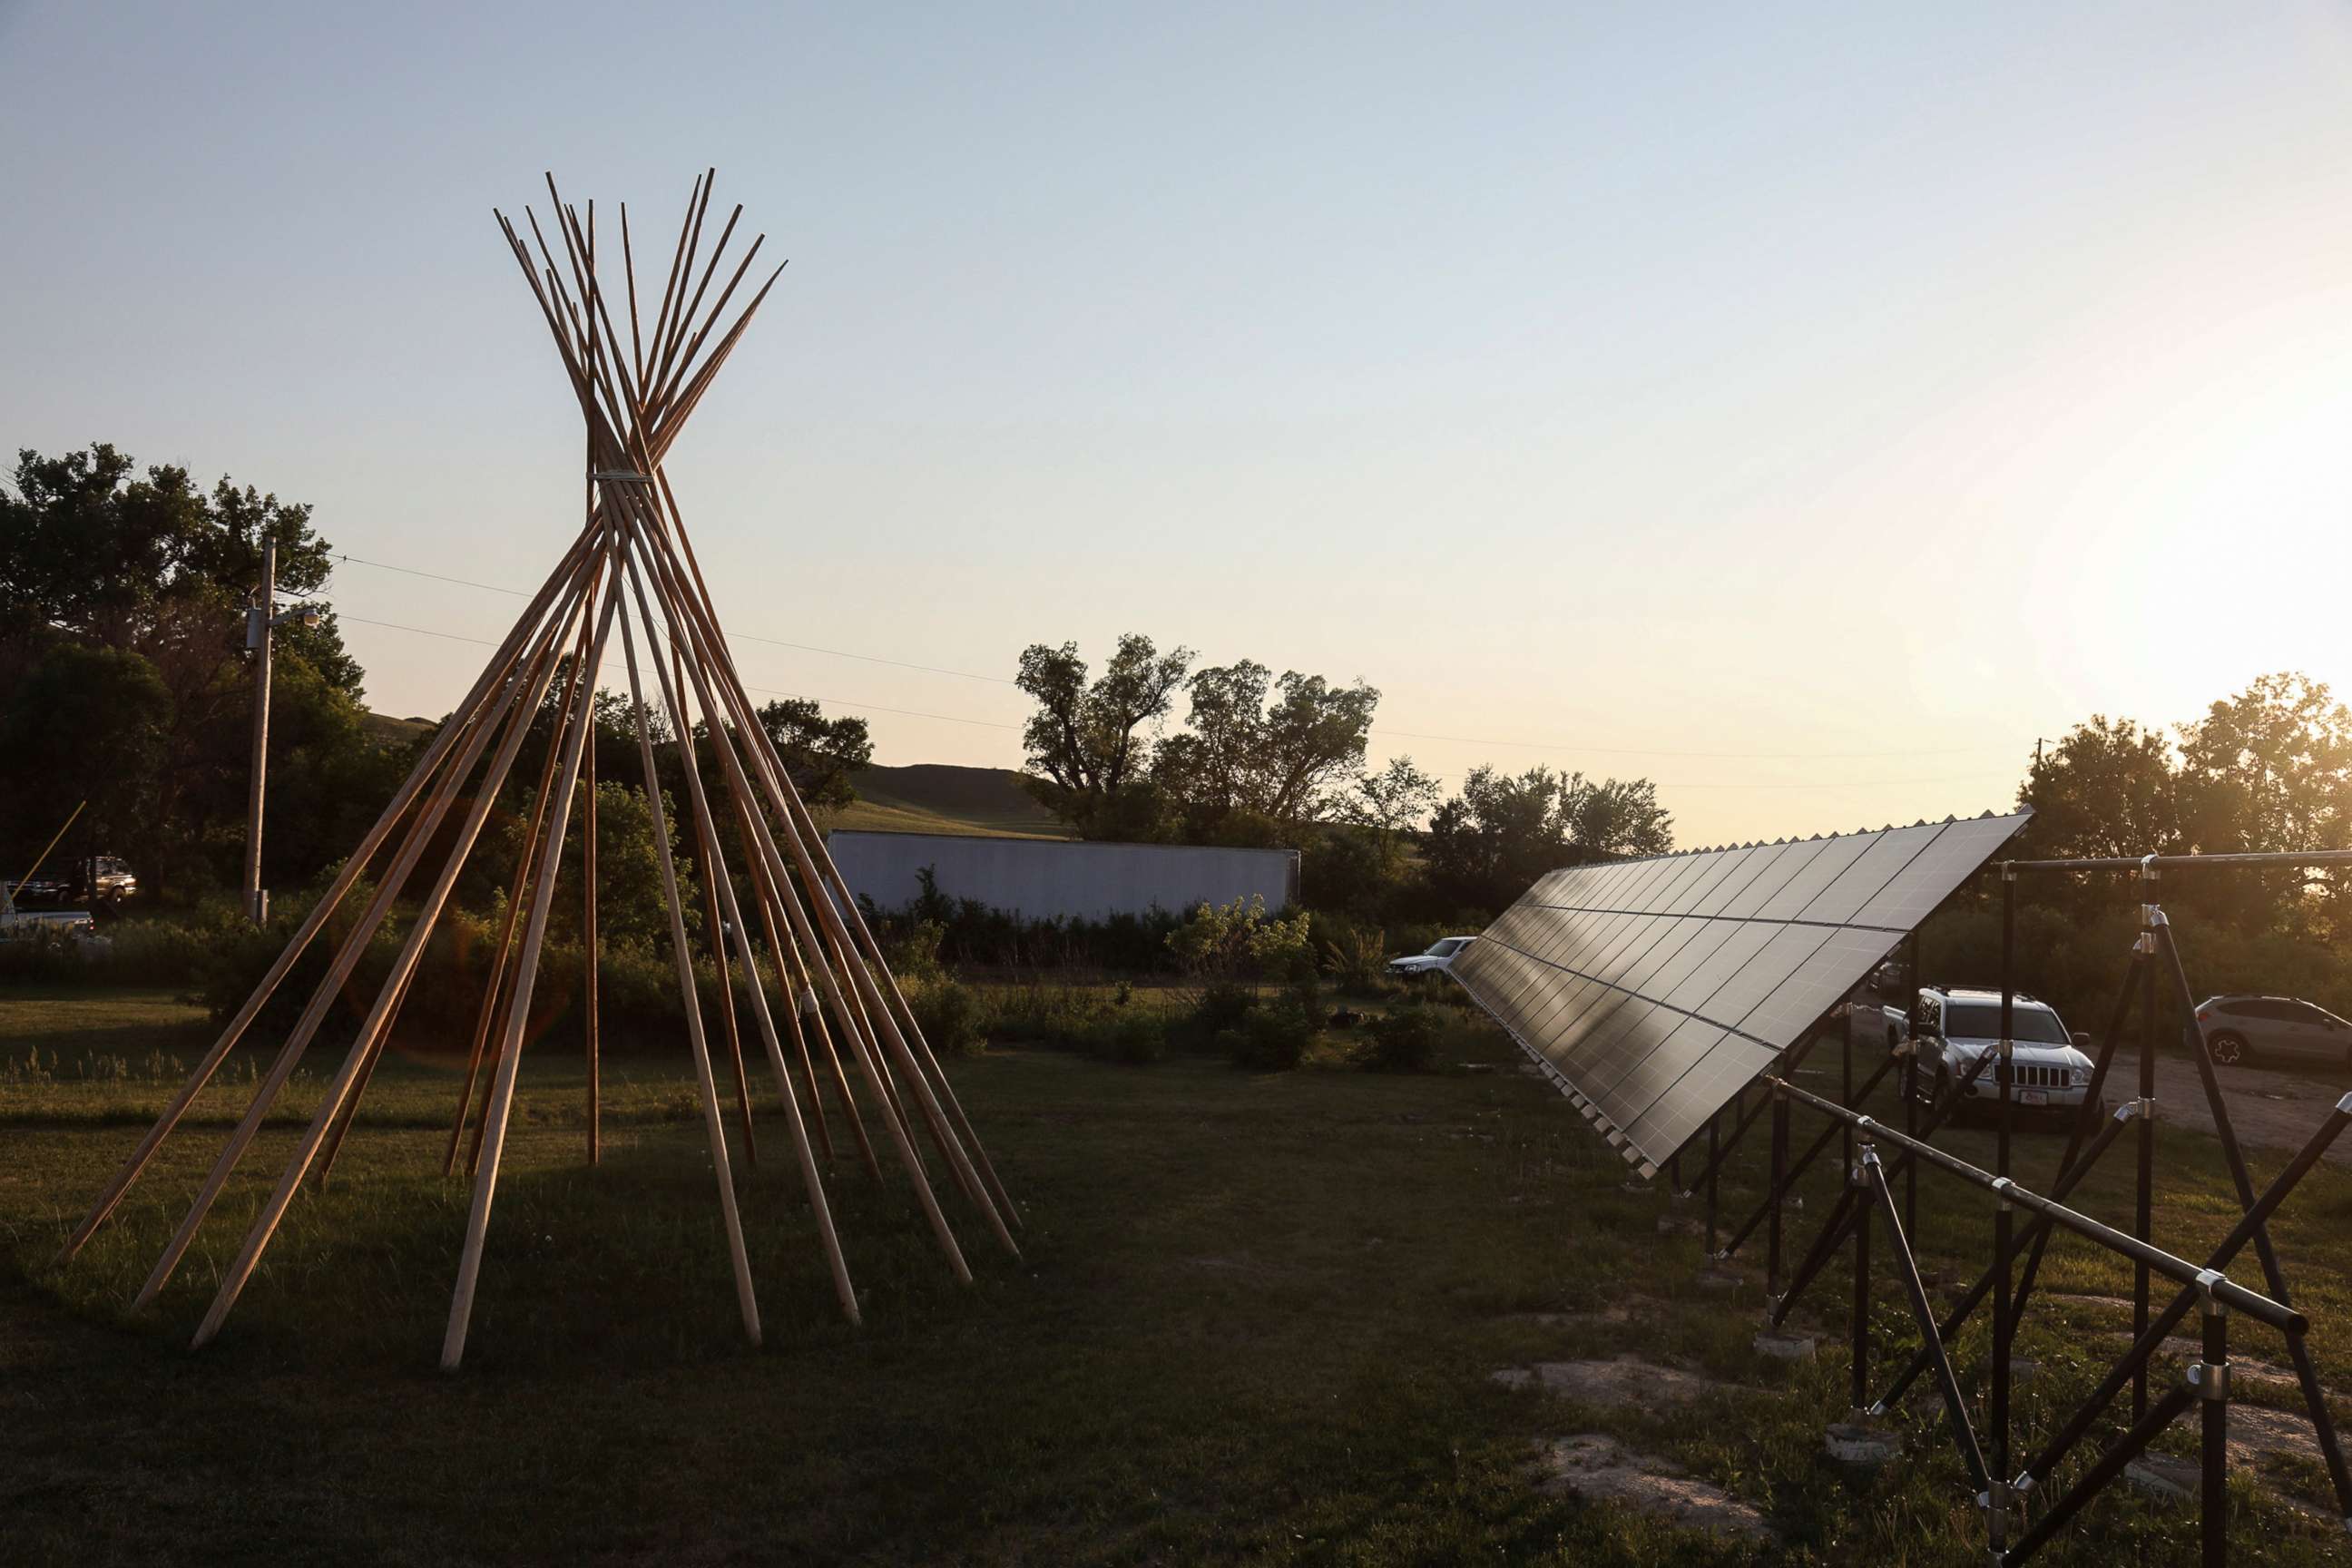 PHOTO: A teepee is reflected onto a solar panel on the Pine Ridge reservation in South Dakota, June 16, 2021.